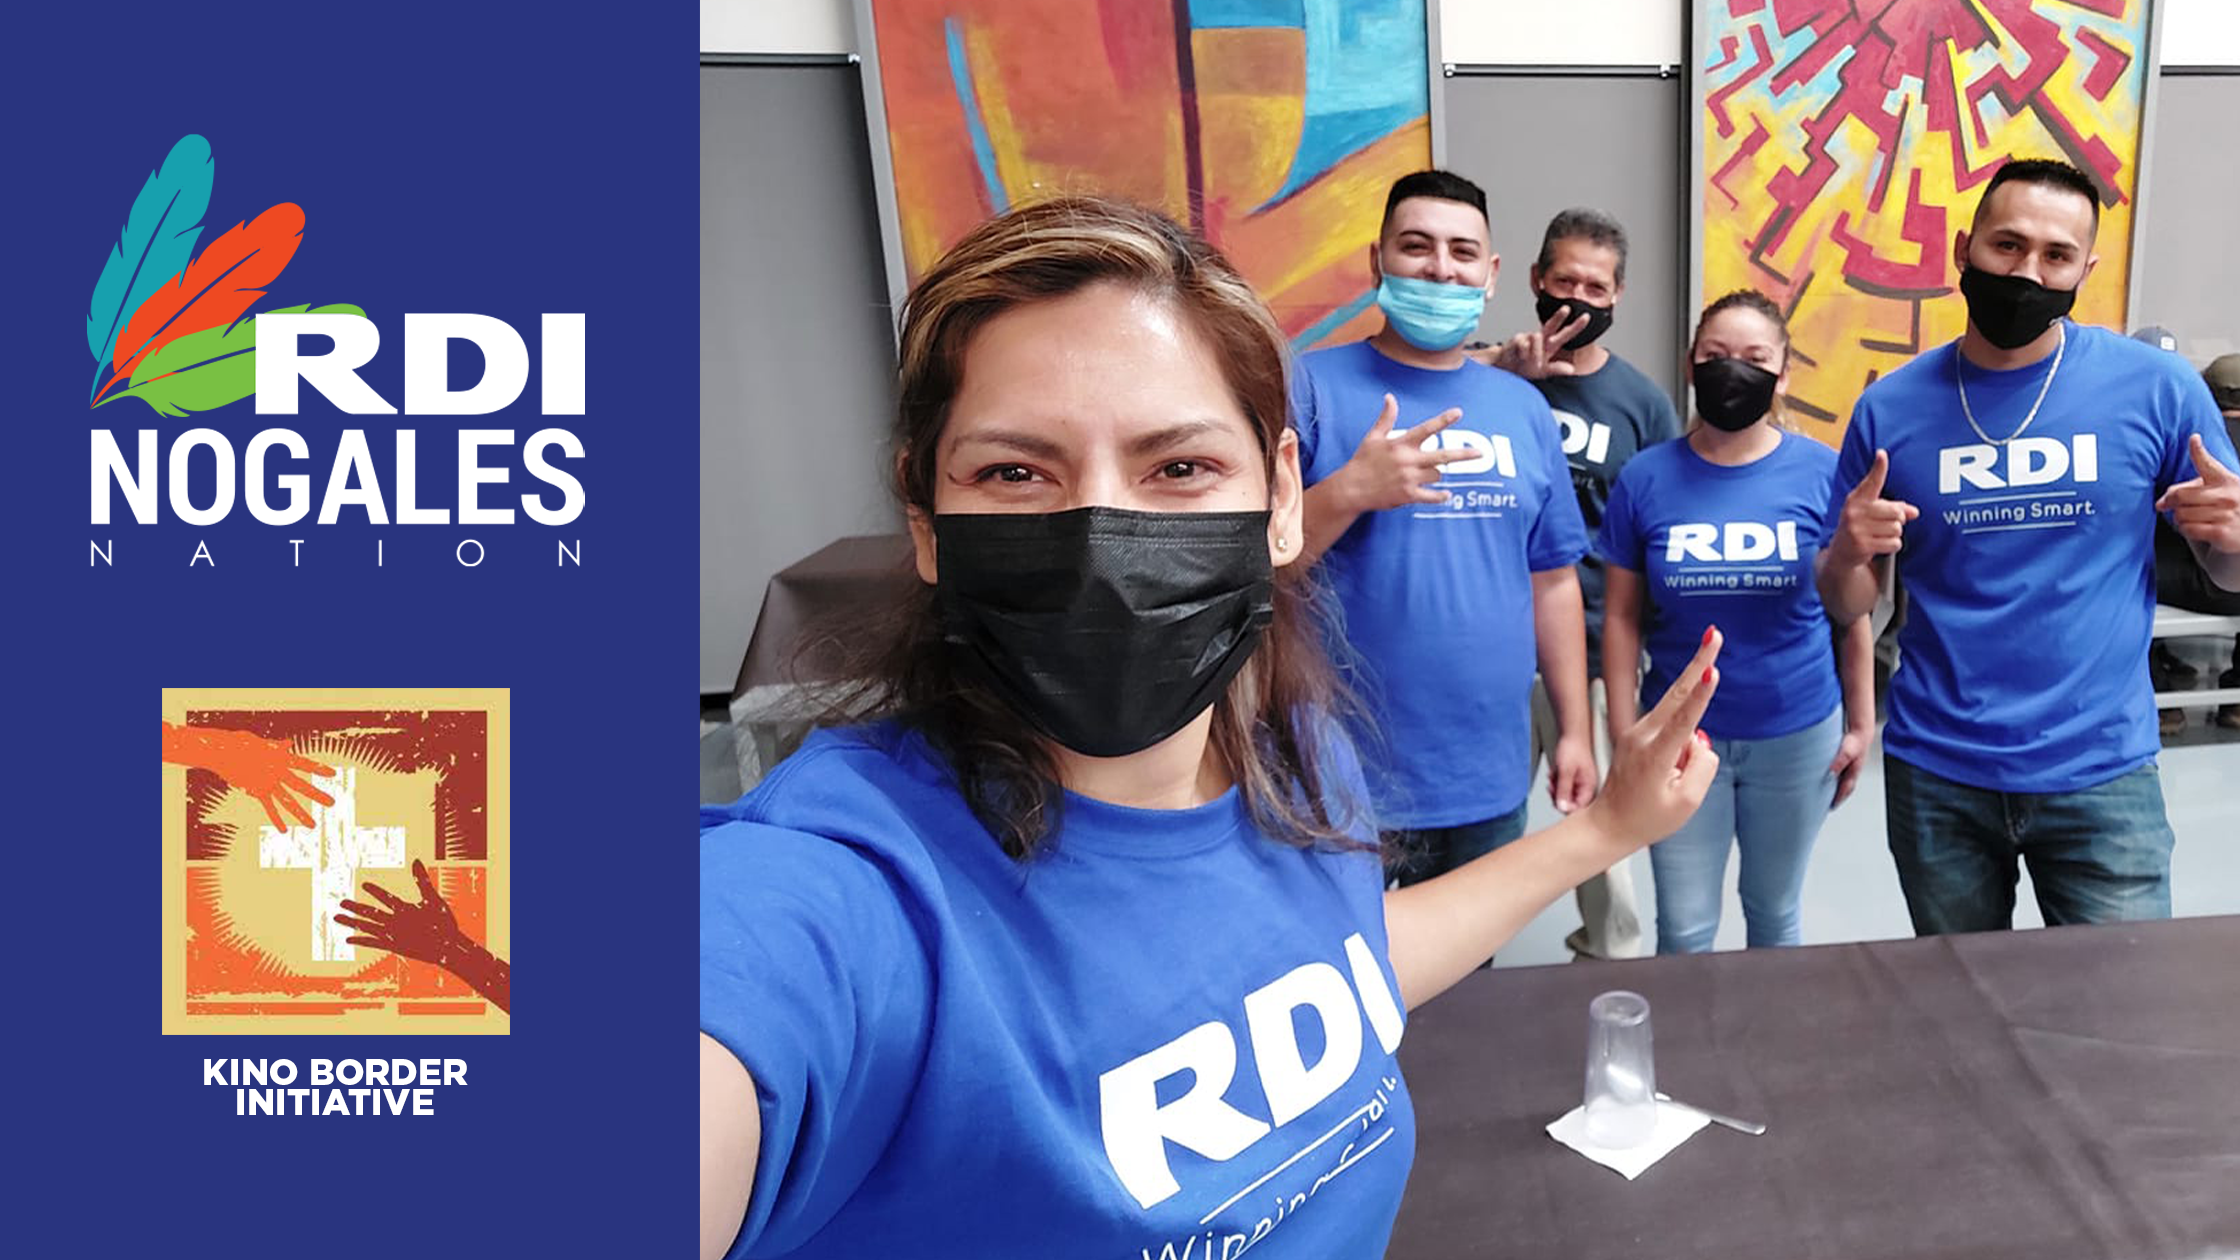 RDI Connect blog - RDI Connect Contact Center in Nogales Mexico Impacts Lives Through Volunteering at Kino